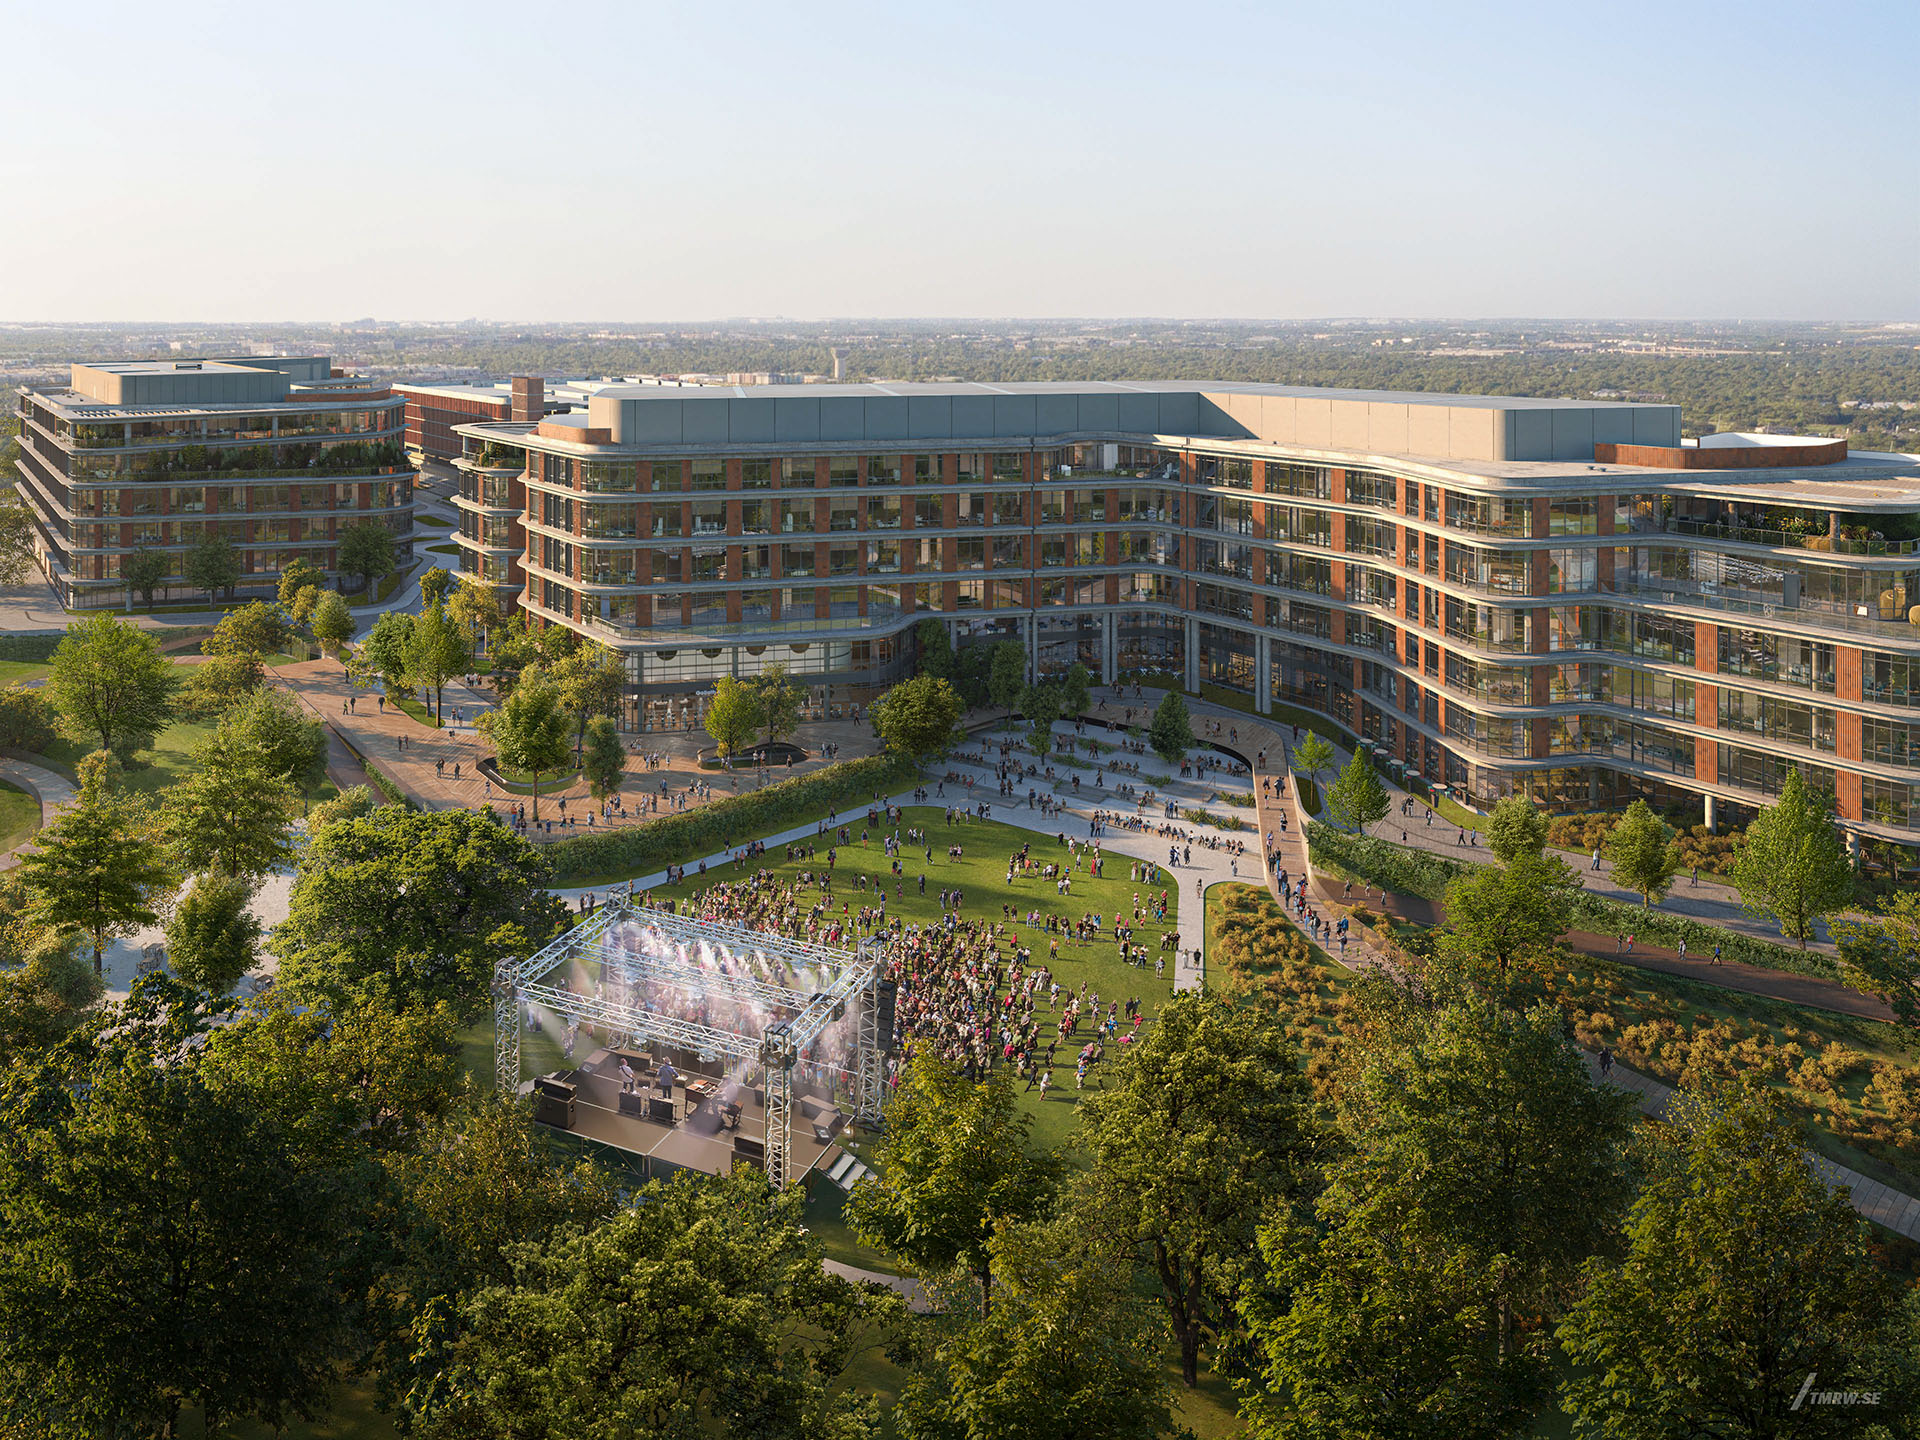 Architectural visualization of Springdale Green for Gensler, an office building in day light from an aerial view